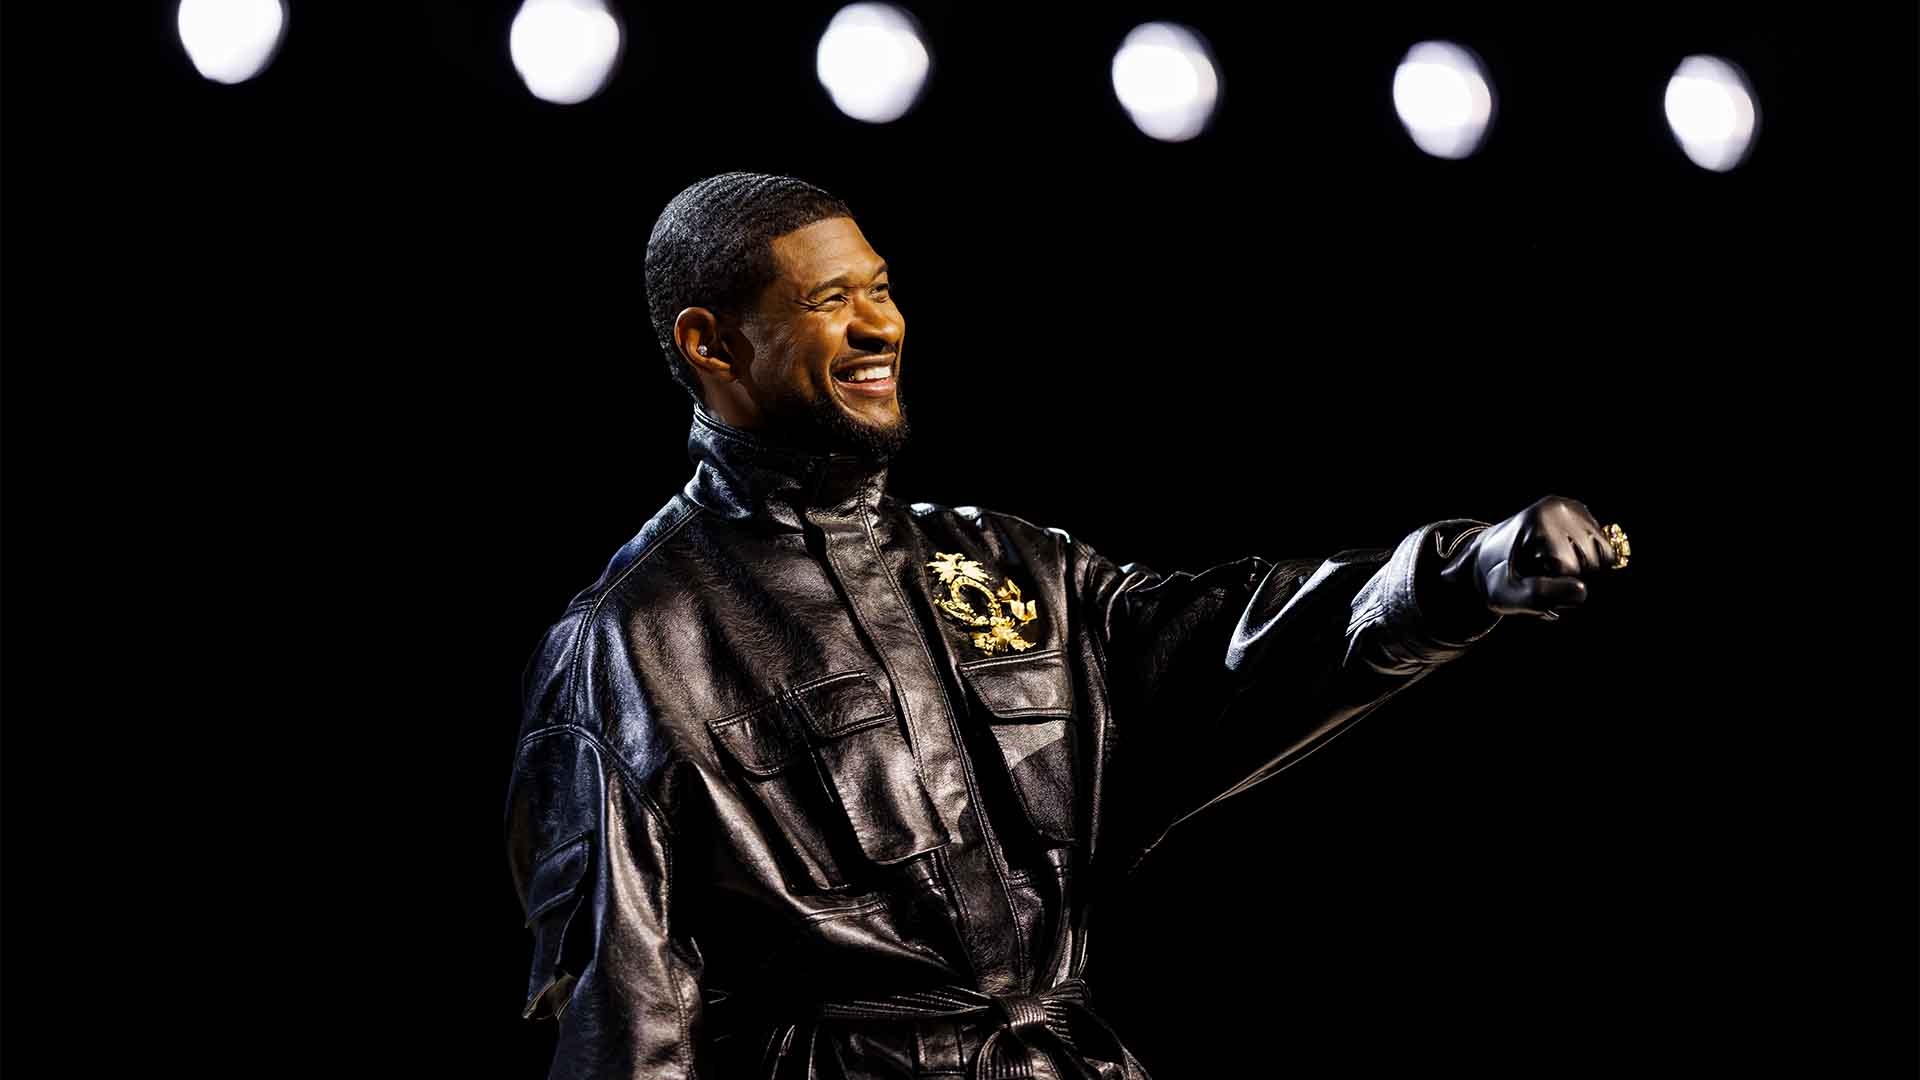 Usher poses for a photo after the Super Bowl LVIII Pregame & Apple Music Super Bowl LVIII Halftime Show press conference at the Mandalay Bay Convention Center